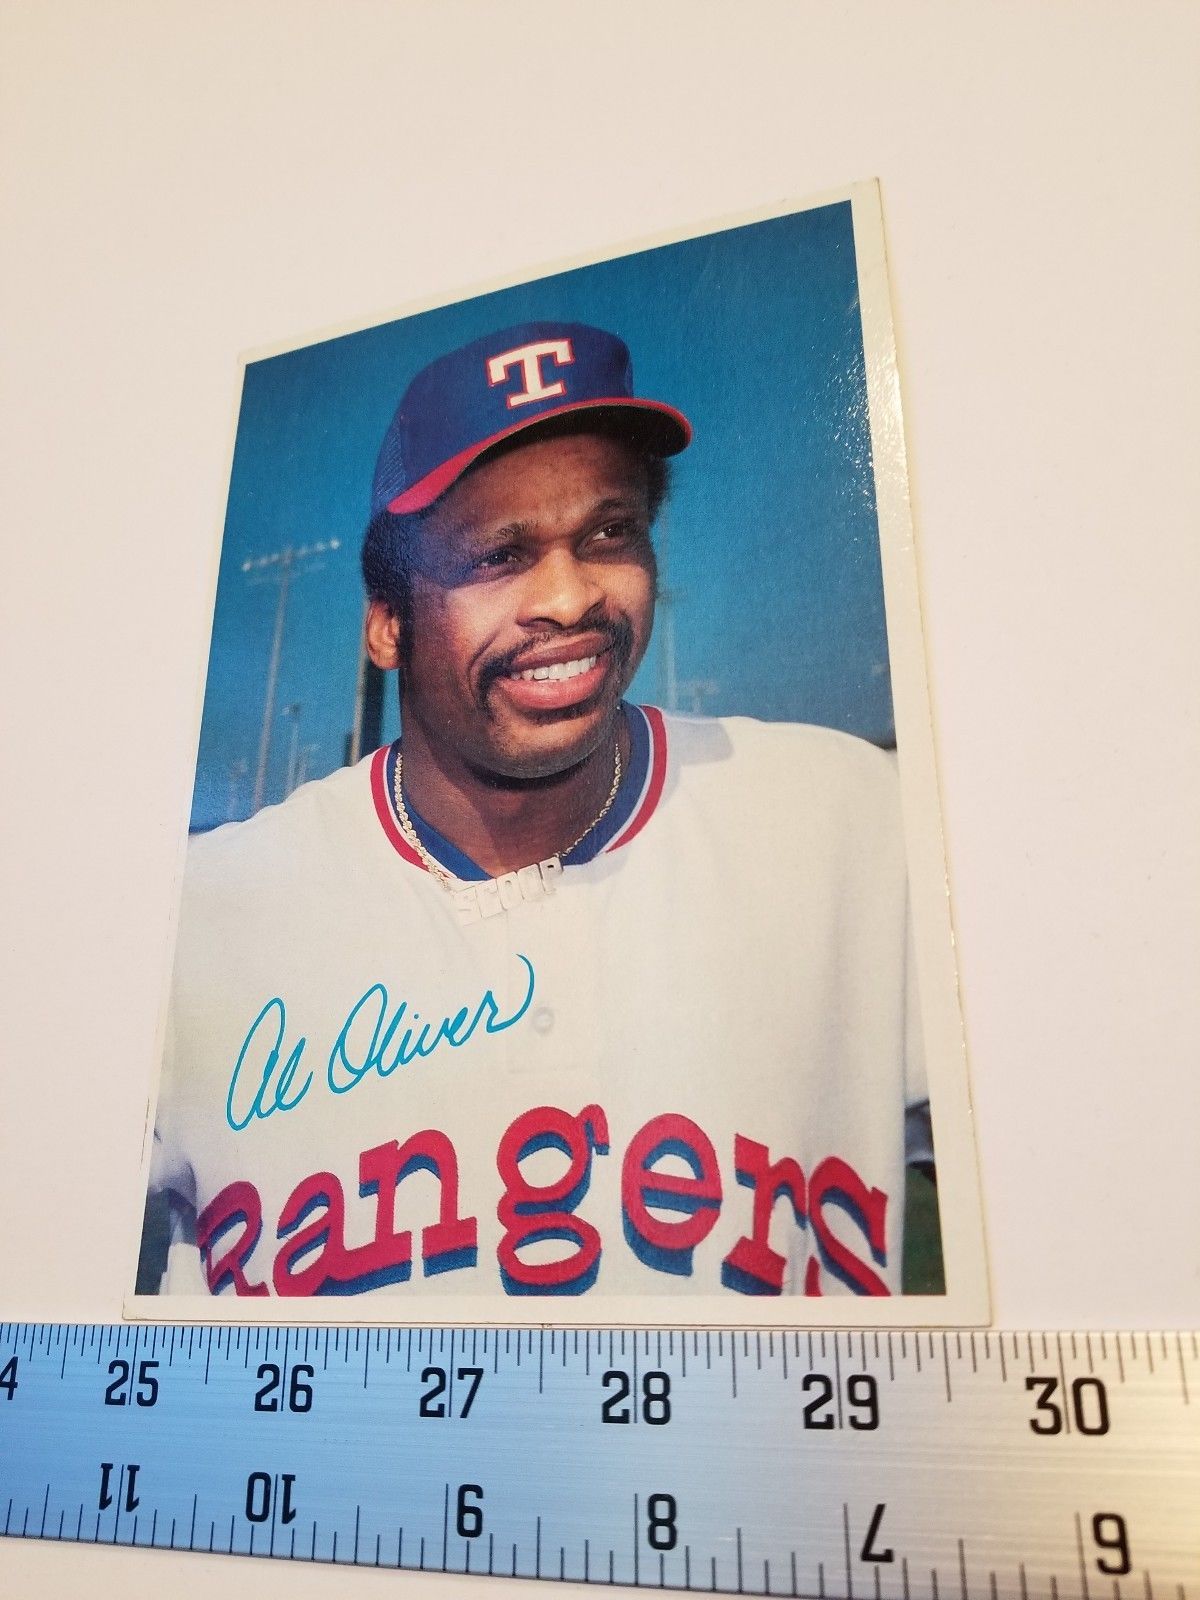 Primary image for Al Oliver Ball Card 5x7 Texas Rangers Outfield Player 1980 Topps MLB Baseball